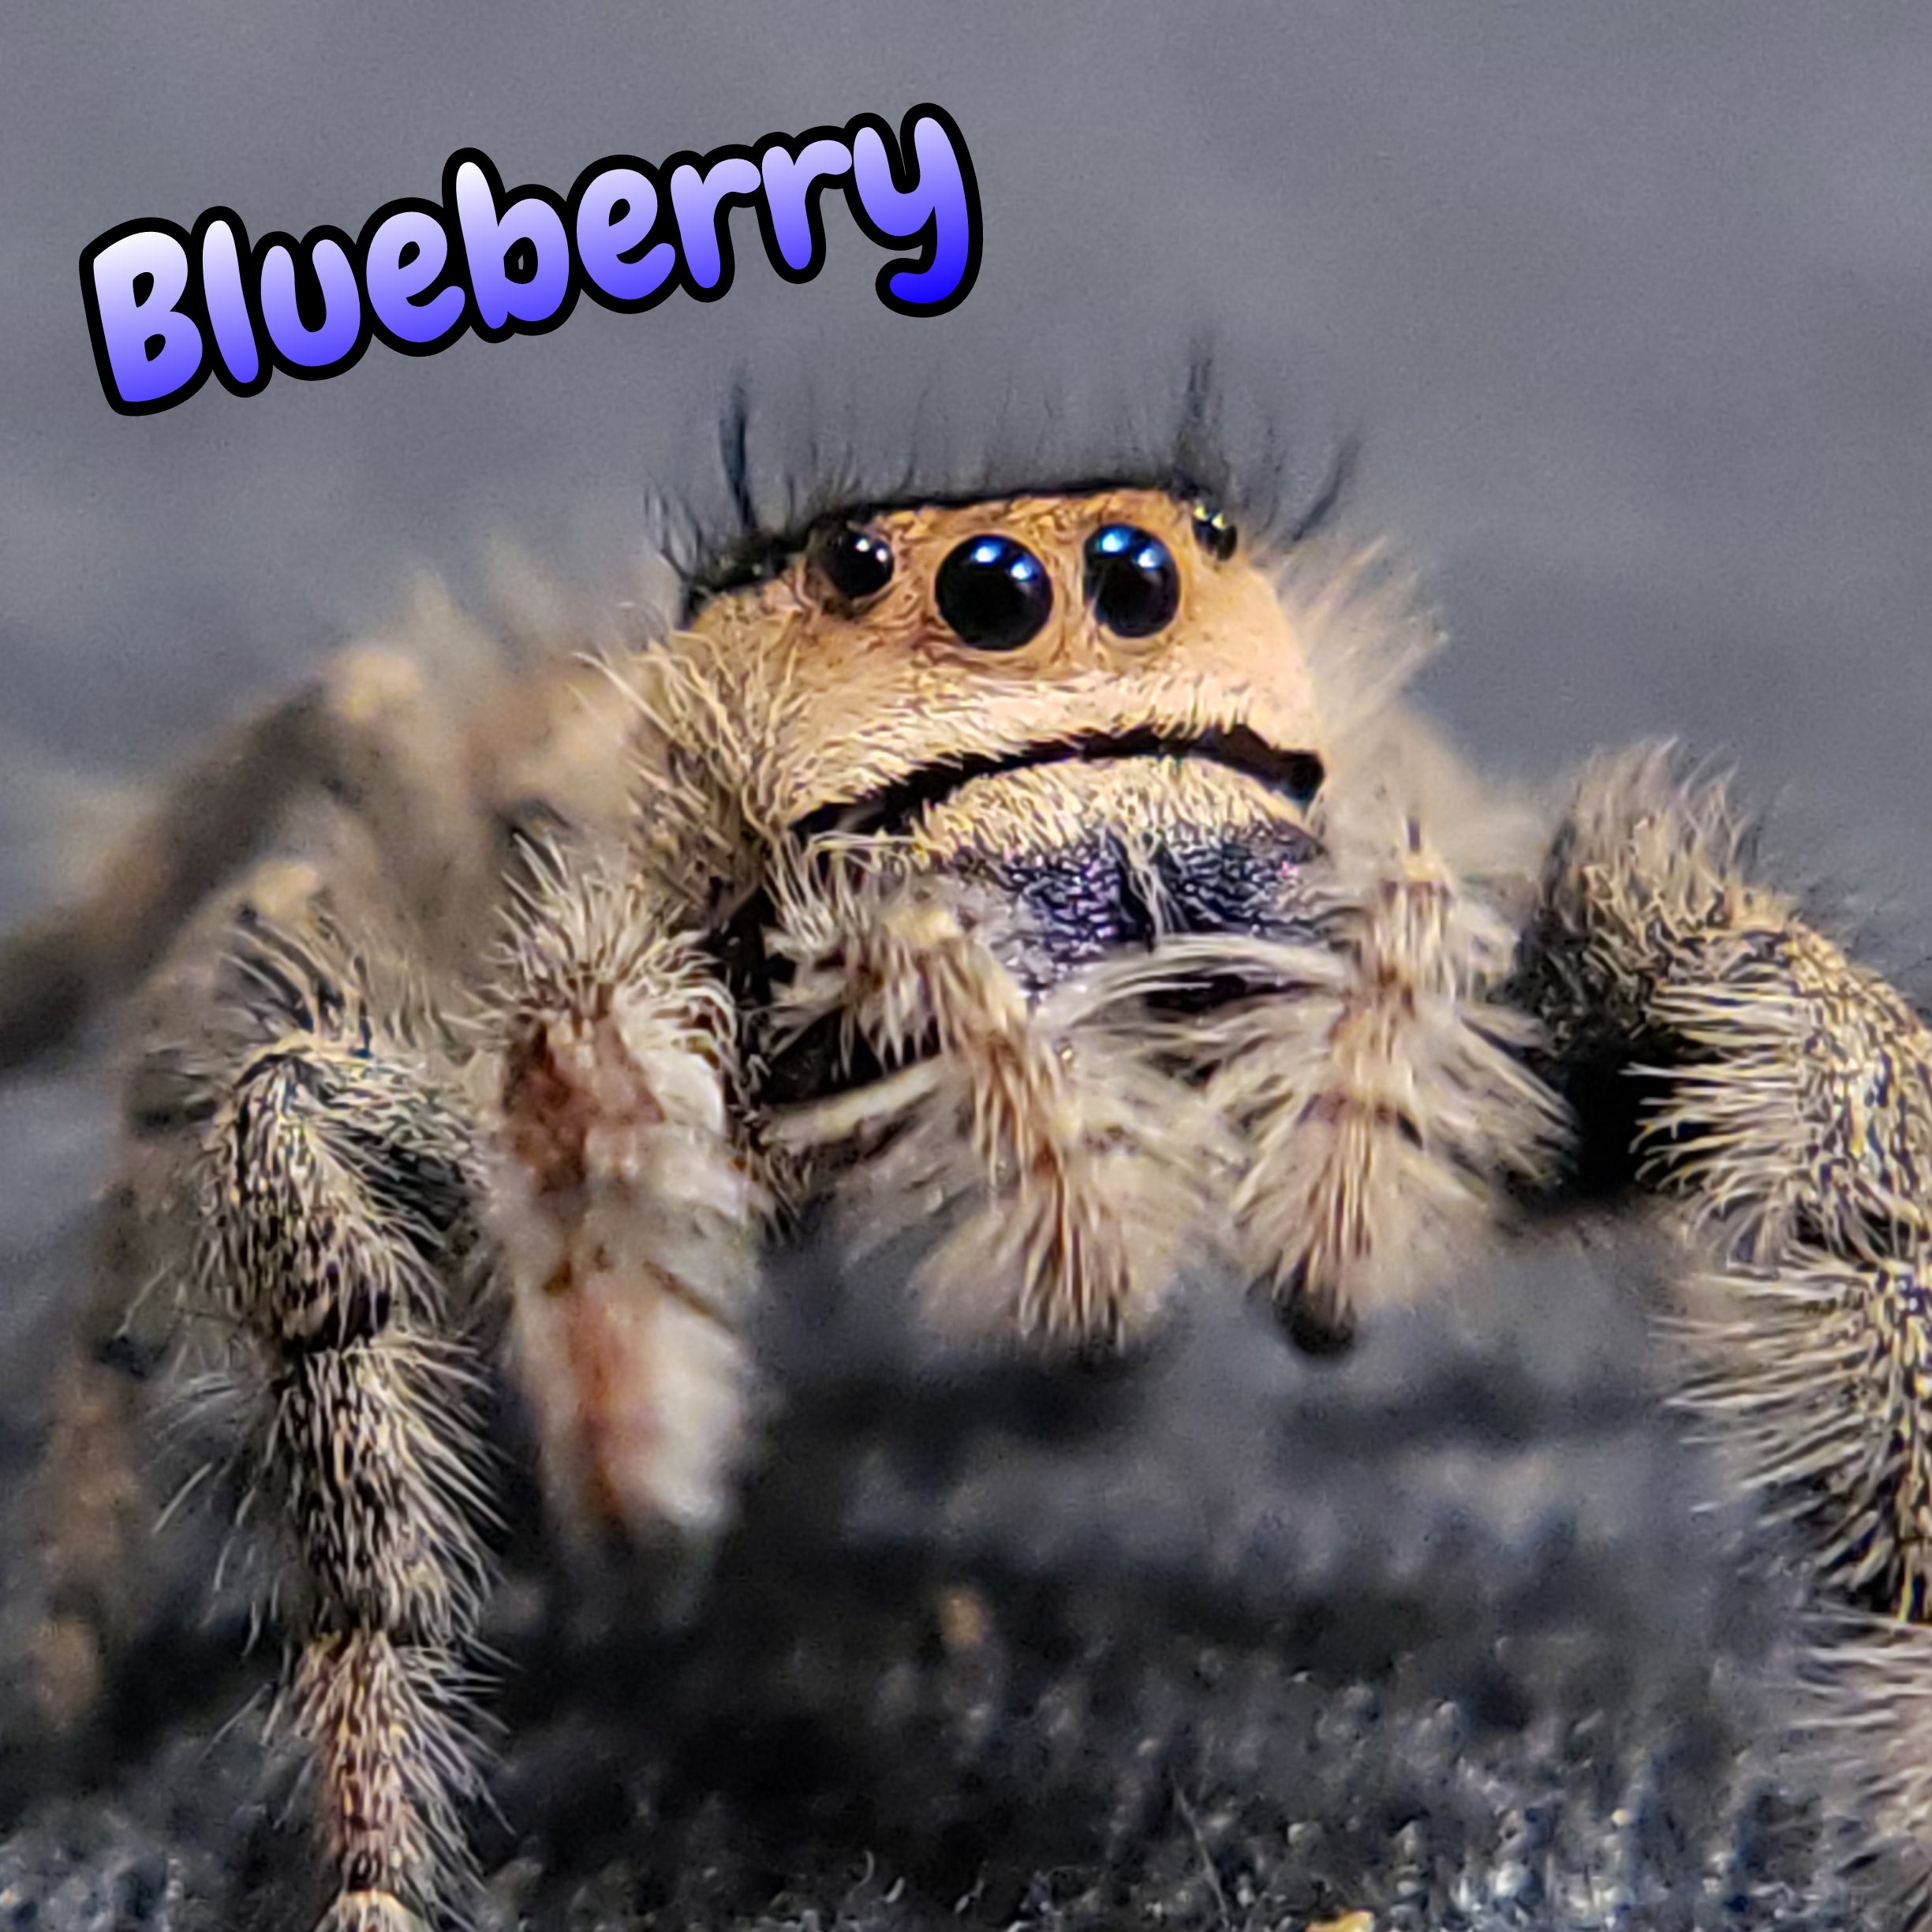 Regal Jumping Spider "Blueberry"